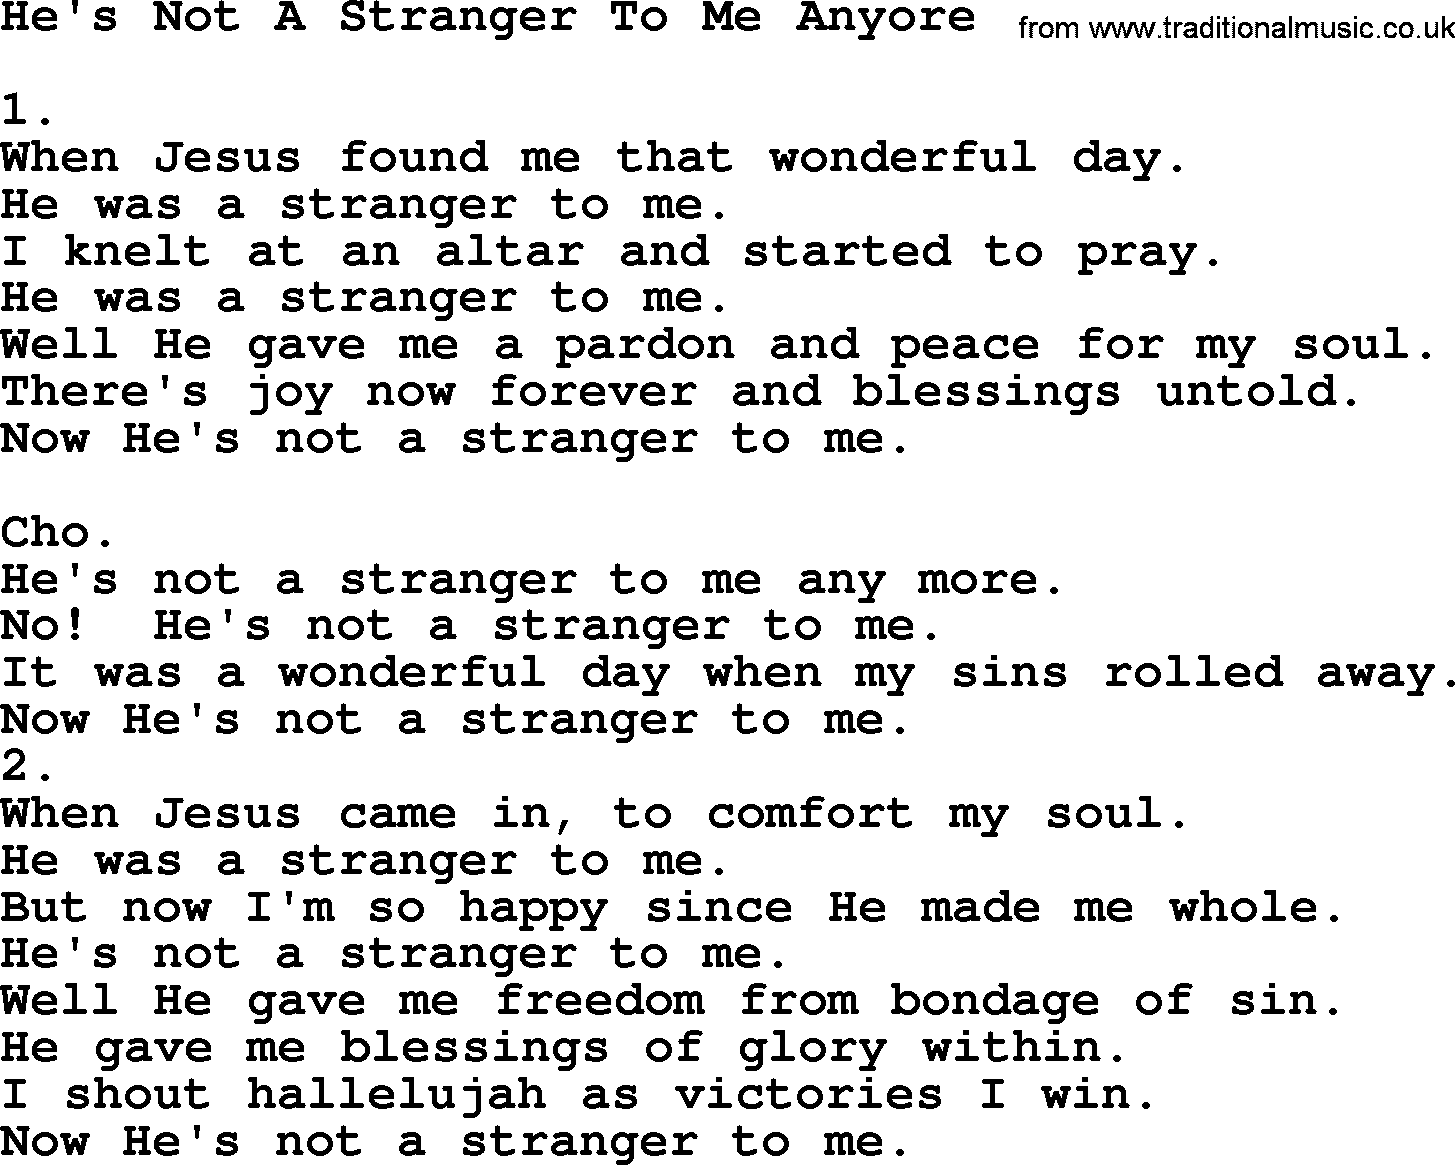 Apostolic & Pentecostal Hymns and Songs, Hymn: He's Not A Stranger To Me Anyore lyrics and PDF